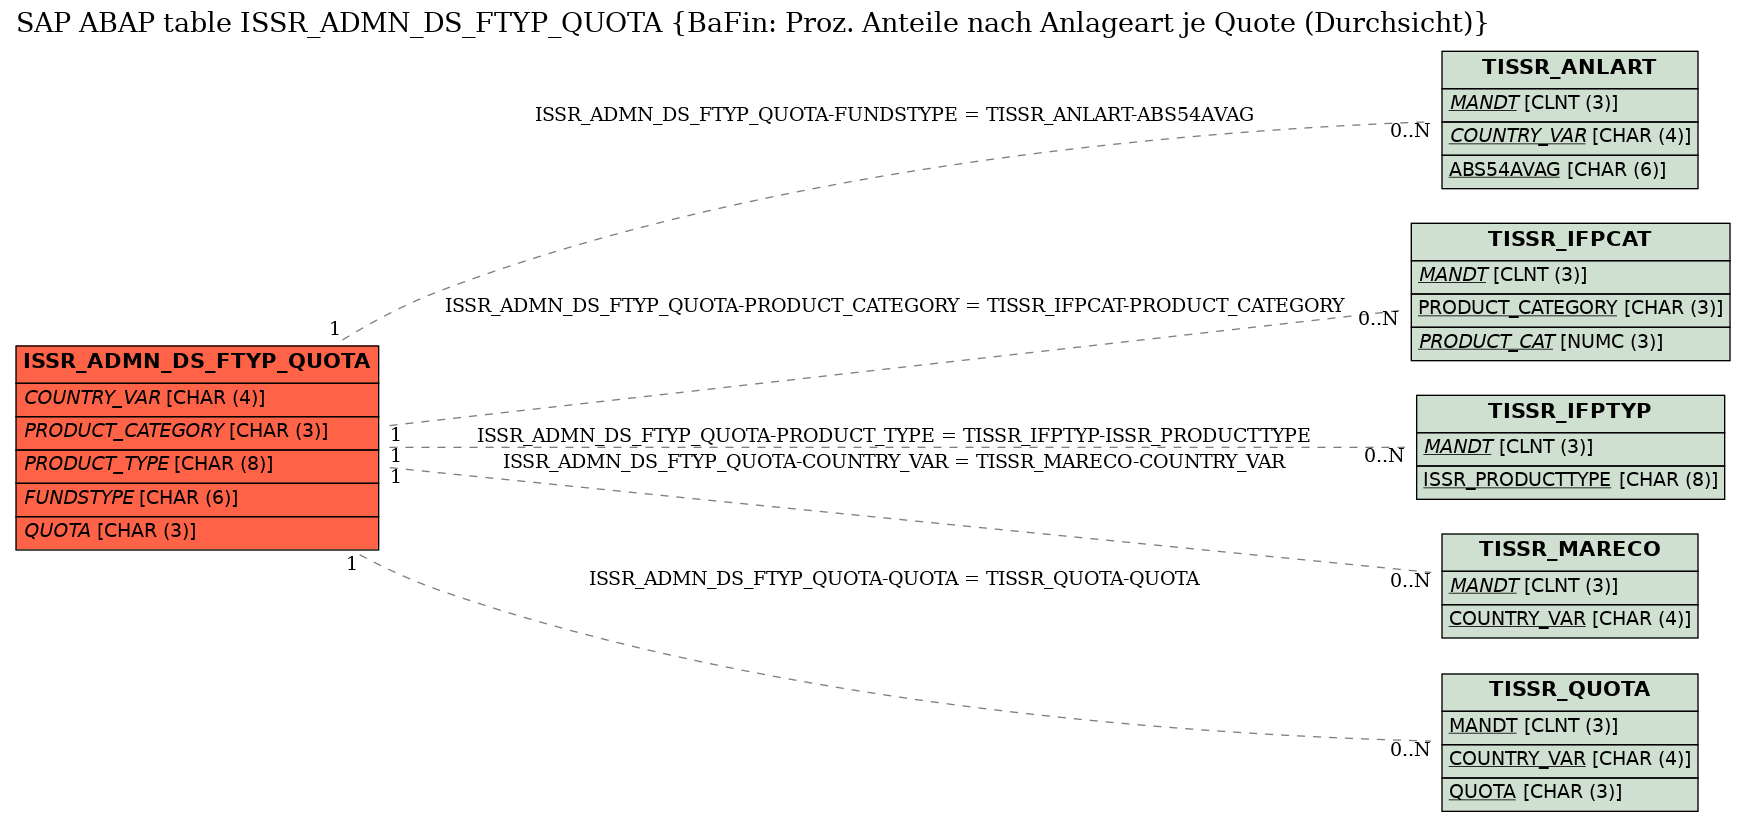 E-R Diagram for table ISSR_ADMN_DS_FTYP_QUOTA (BaFin: Proz. Anteile nach Anlageart je Quote (Durchsicht))